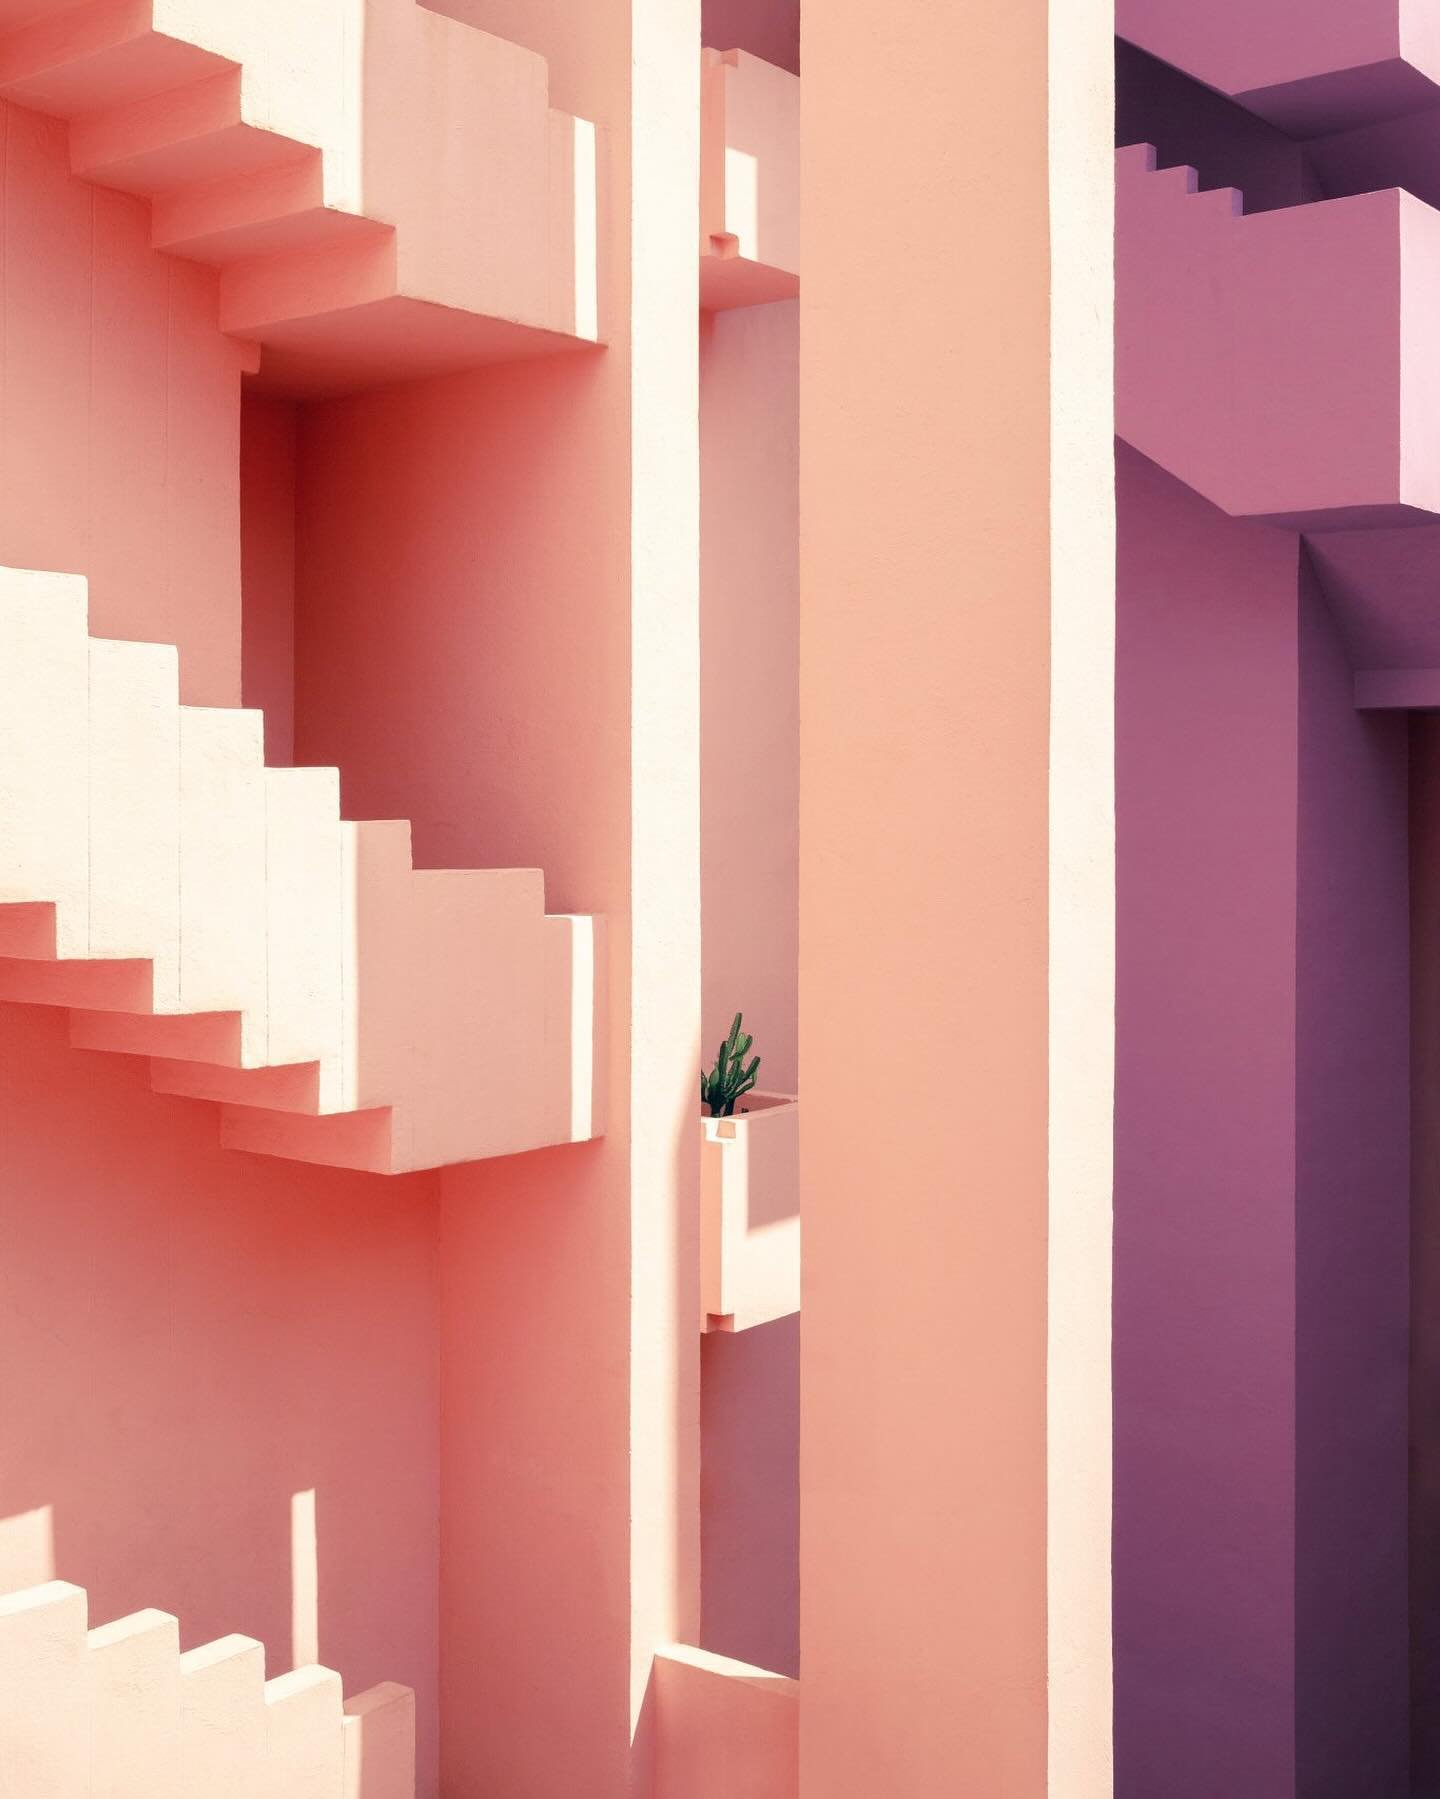 Sure, you&rsquo;ve seen the famous Muralla Roja from @bofillarquitectura many times, but the truth is the whole building is a gift that keeps on giving if you know how to capture it well. And @mark.wernet knows exactly how to do that ✨📸 
&mdash;
#ar